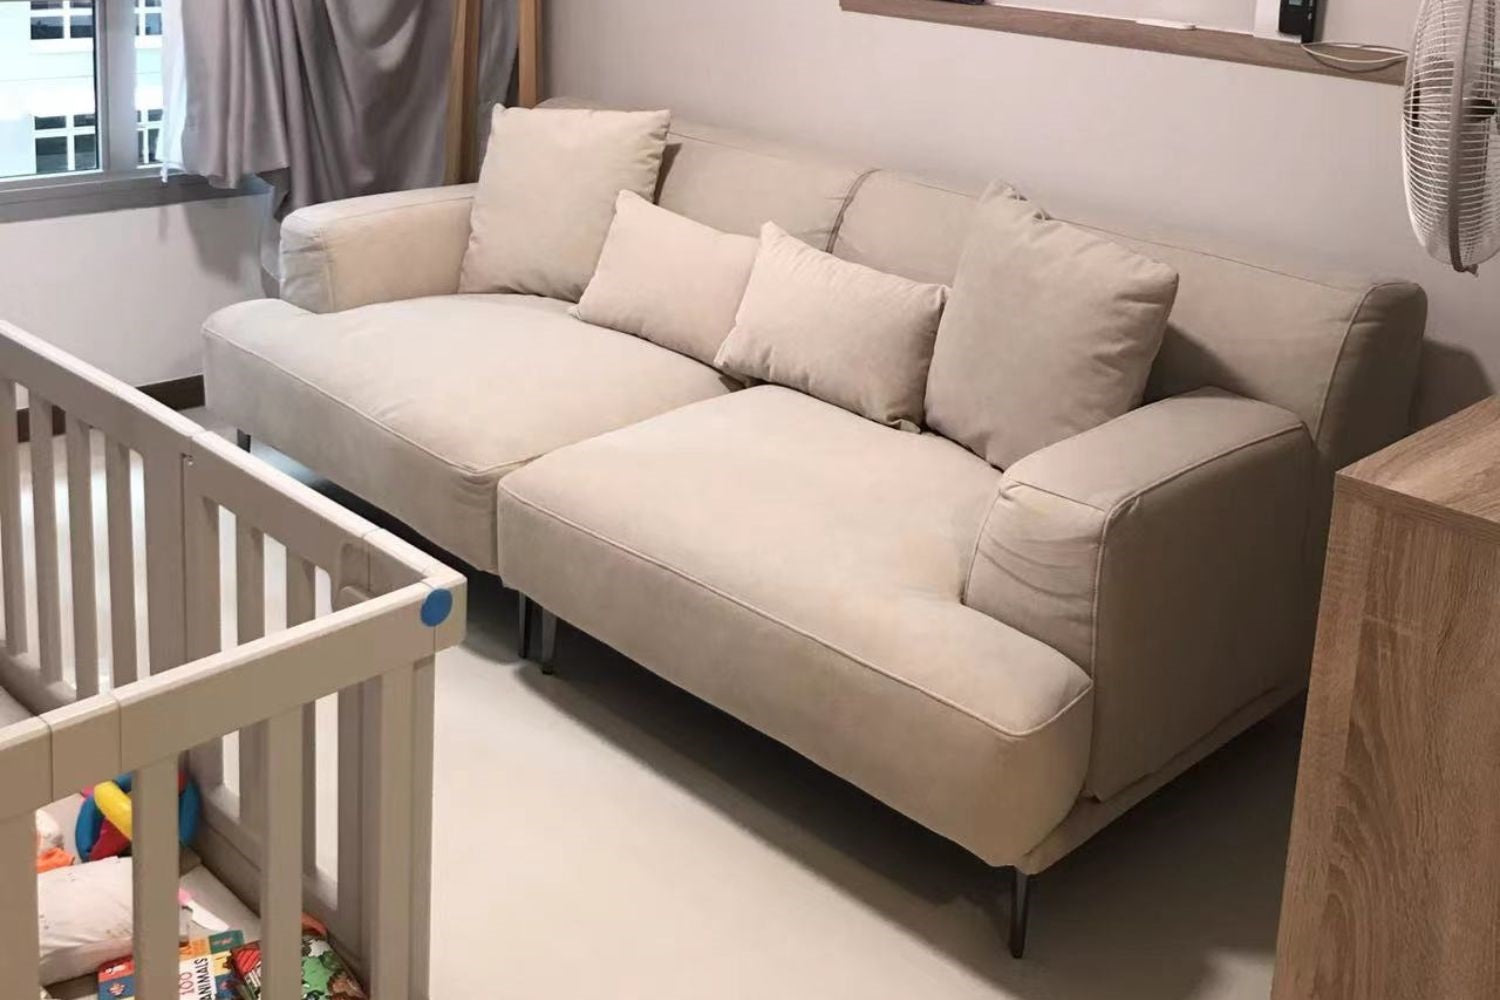 Crystal 210cm beige fabric sofa bed in customer's home